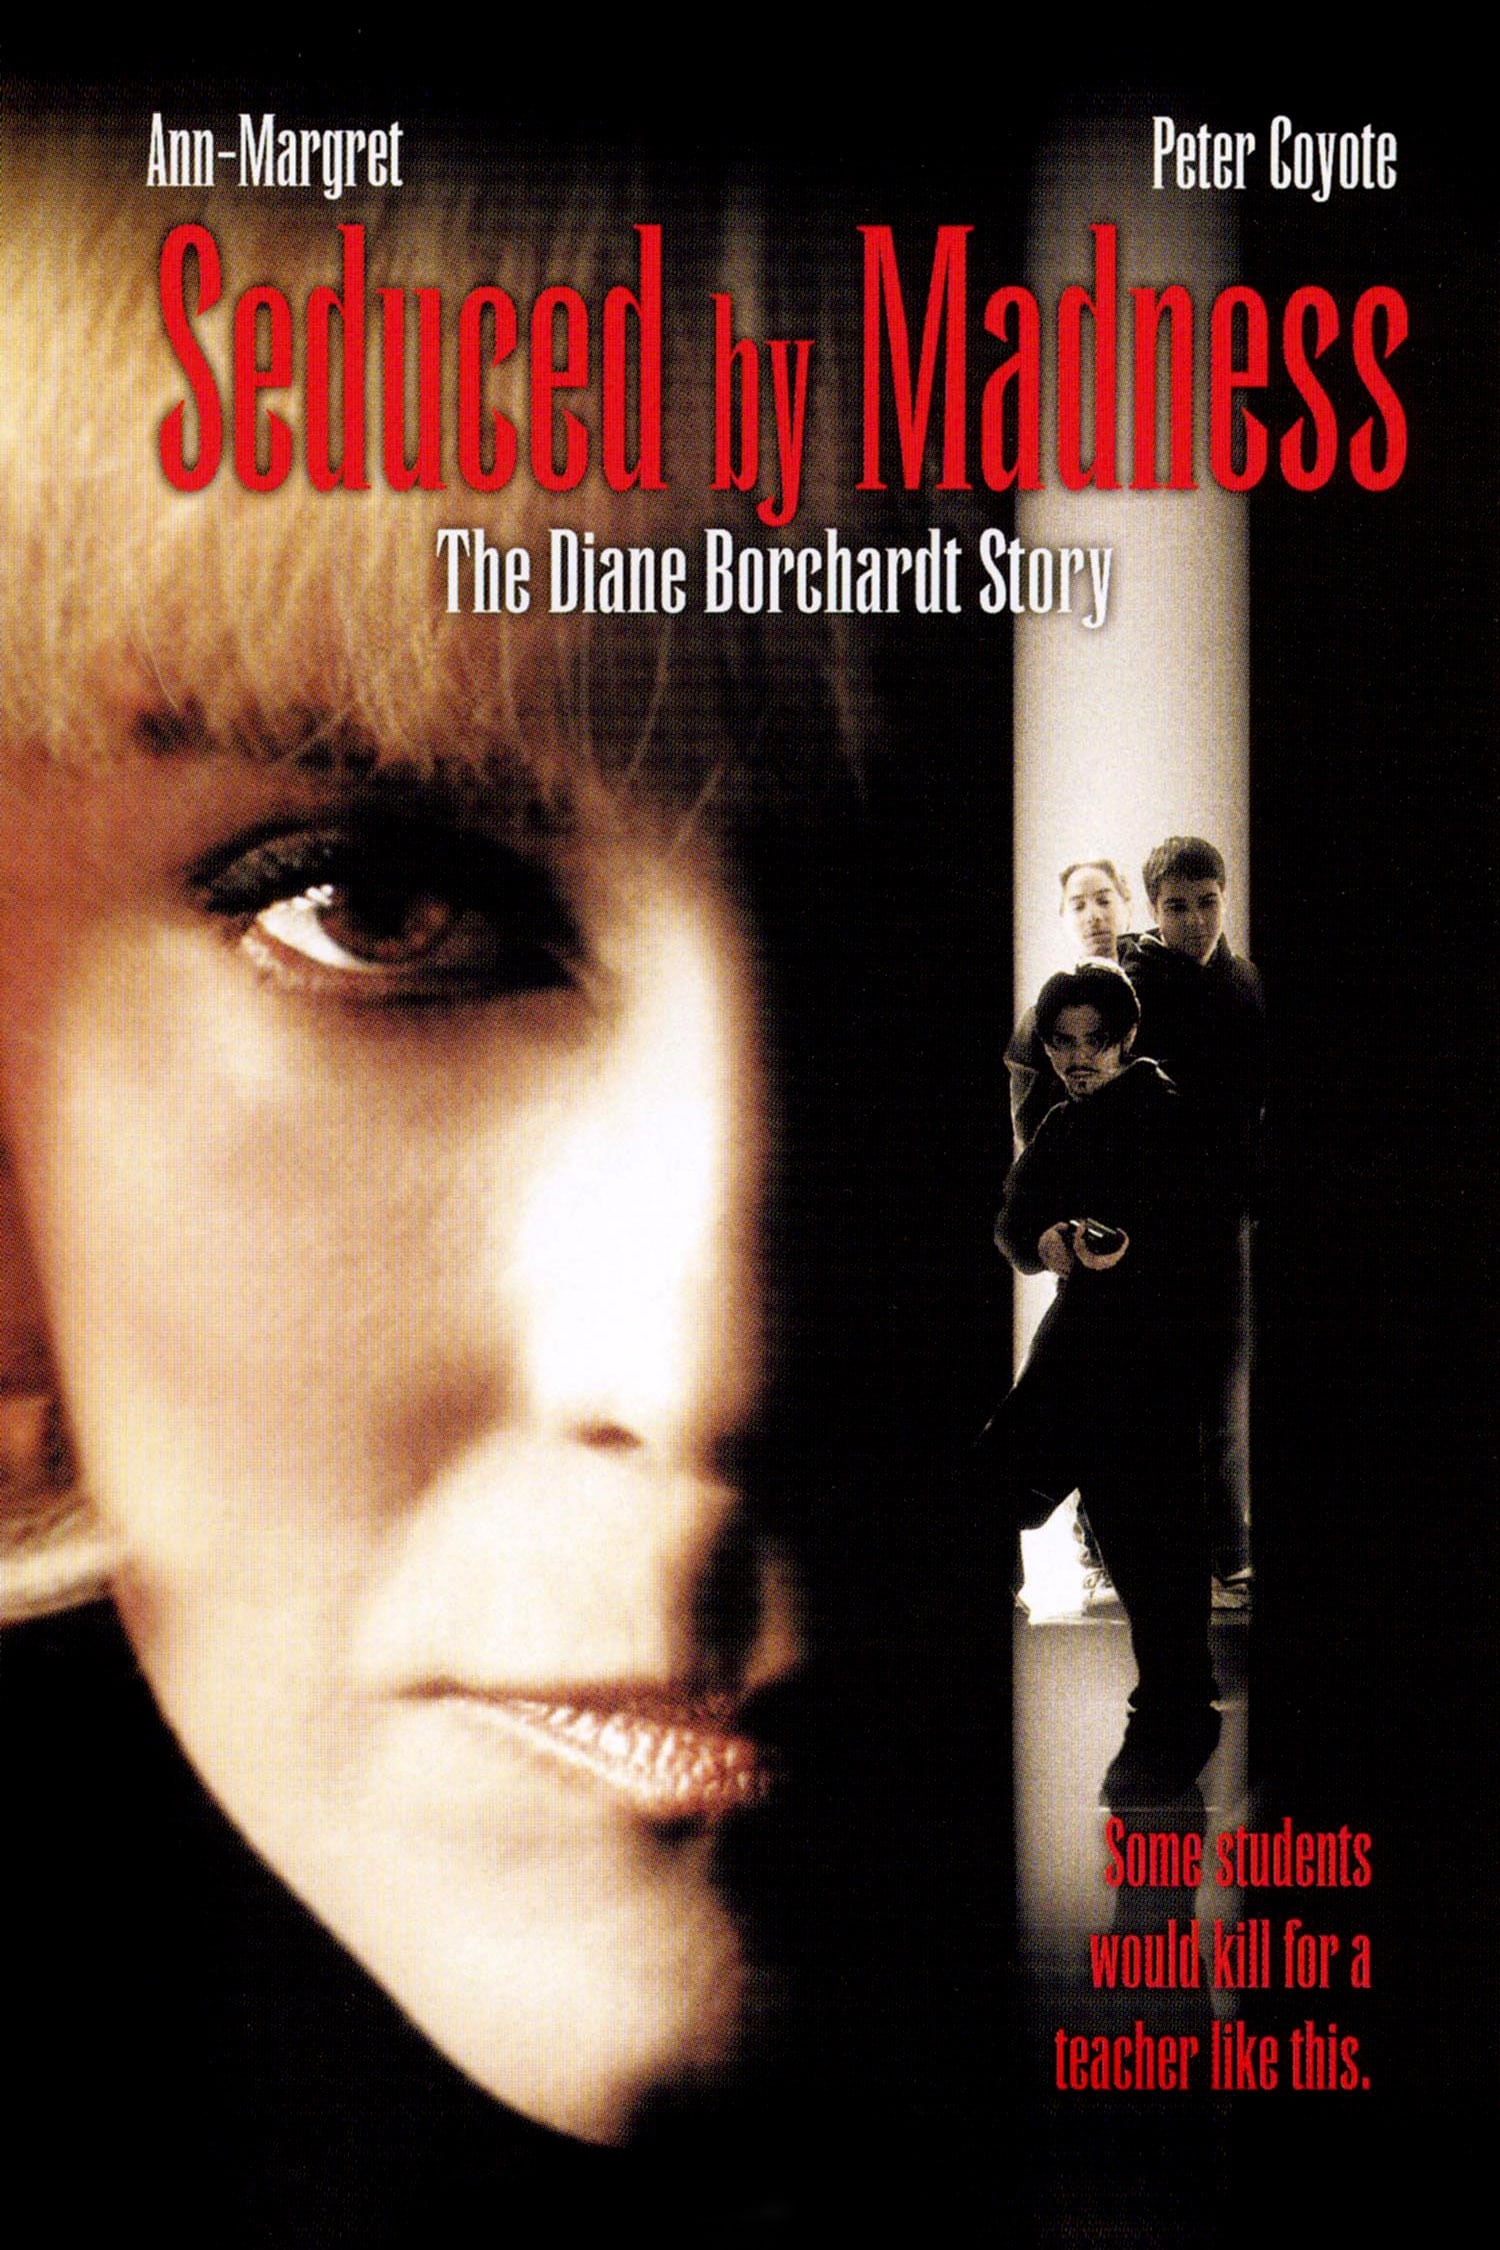 Seduced by Madness: The Diane Borchardt Story (1996)